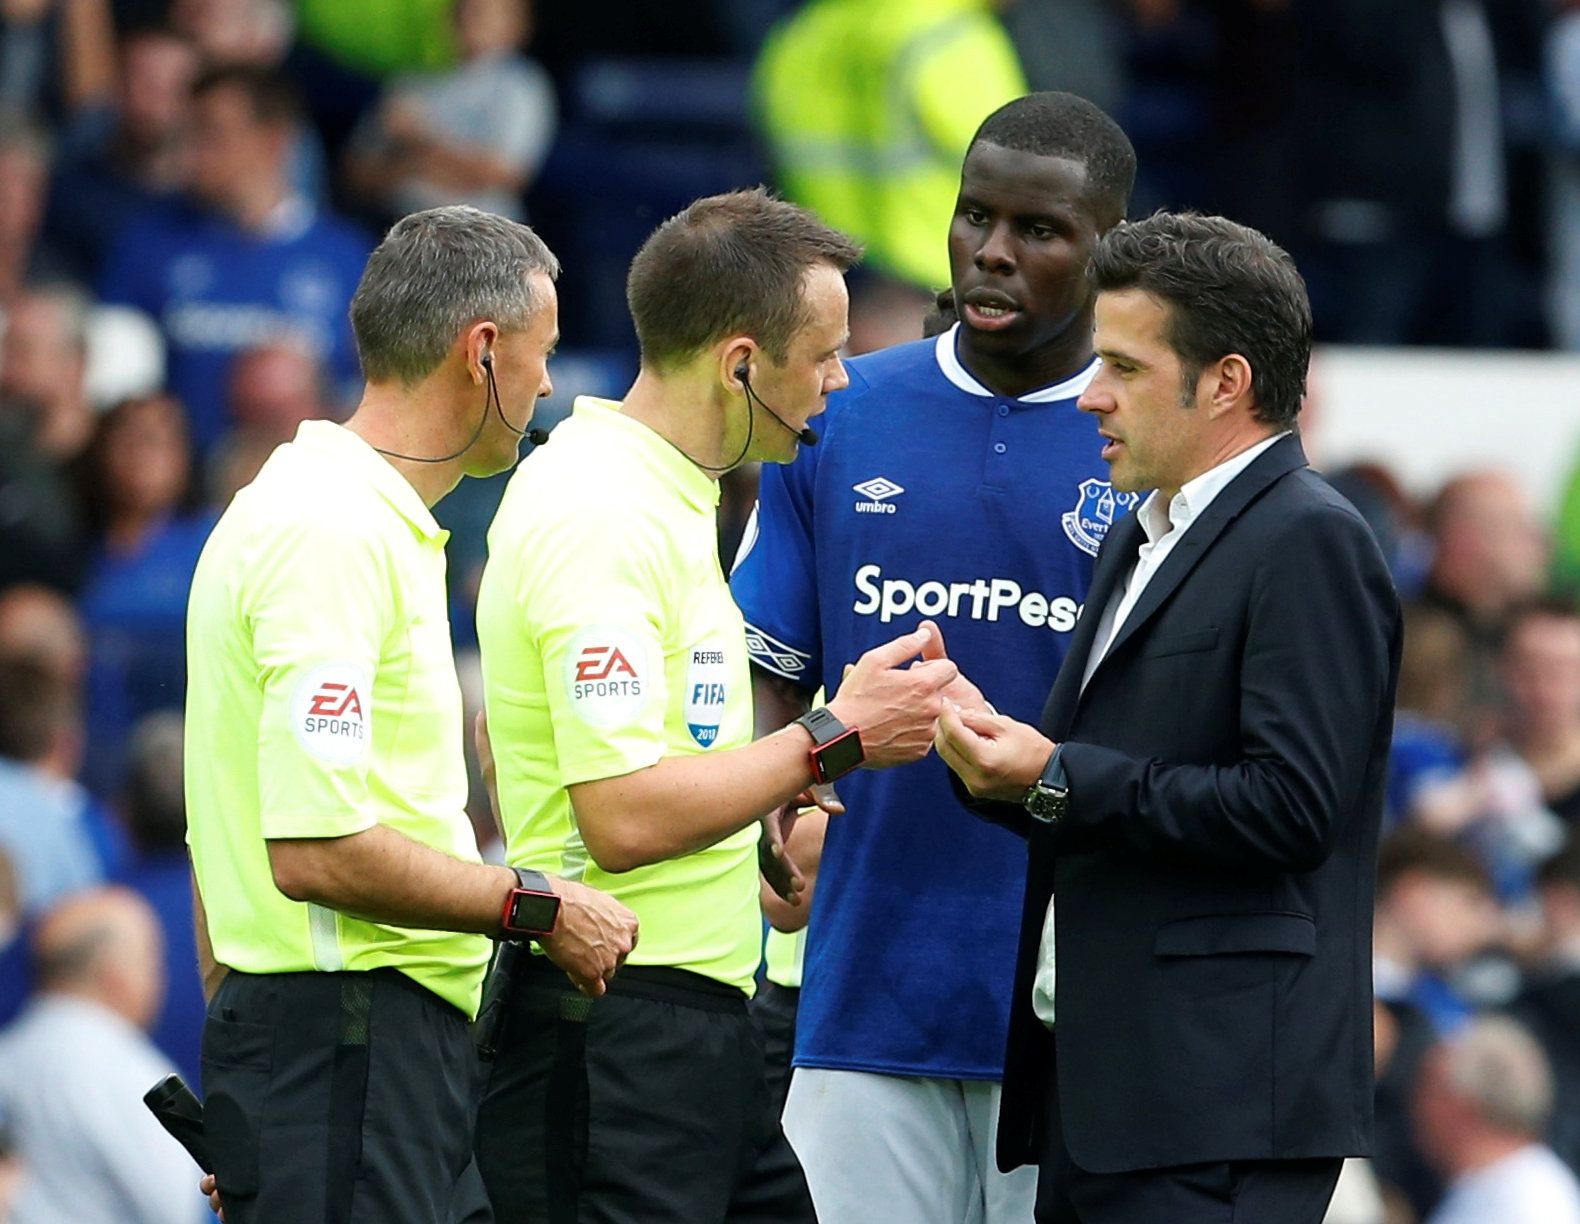 Soccer Football - Premier League - Everton v Huddersfield Town - Goodison Park, Liverpool, Britain - September 1, 2018  Everton manager Marco Silva and Kurt Zouma talk to referee Stuart Attwell after the match       Action Images via Reuters/Craig Brough  EDITORIAL USE ONLY. No use with unauthorized audio, video, data, fixture lists, club/league logos or 